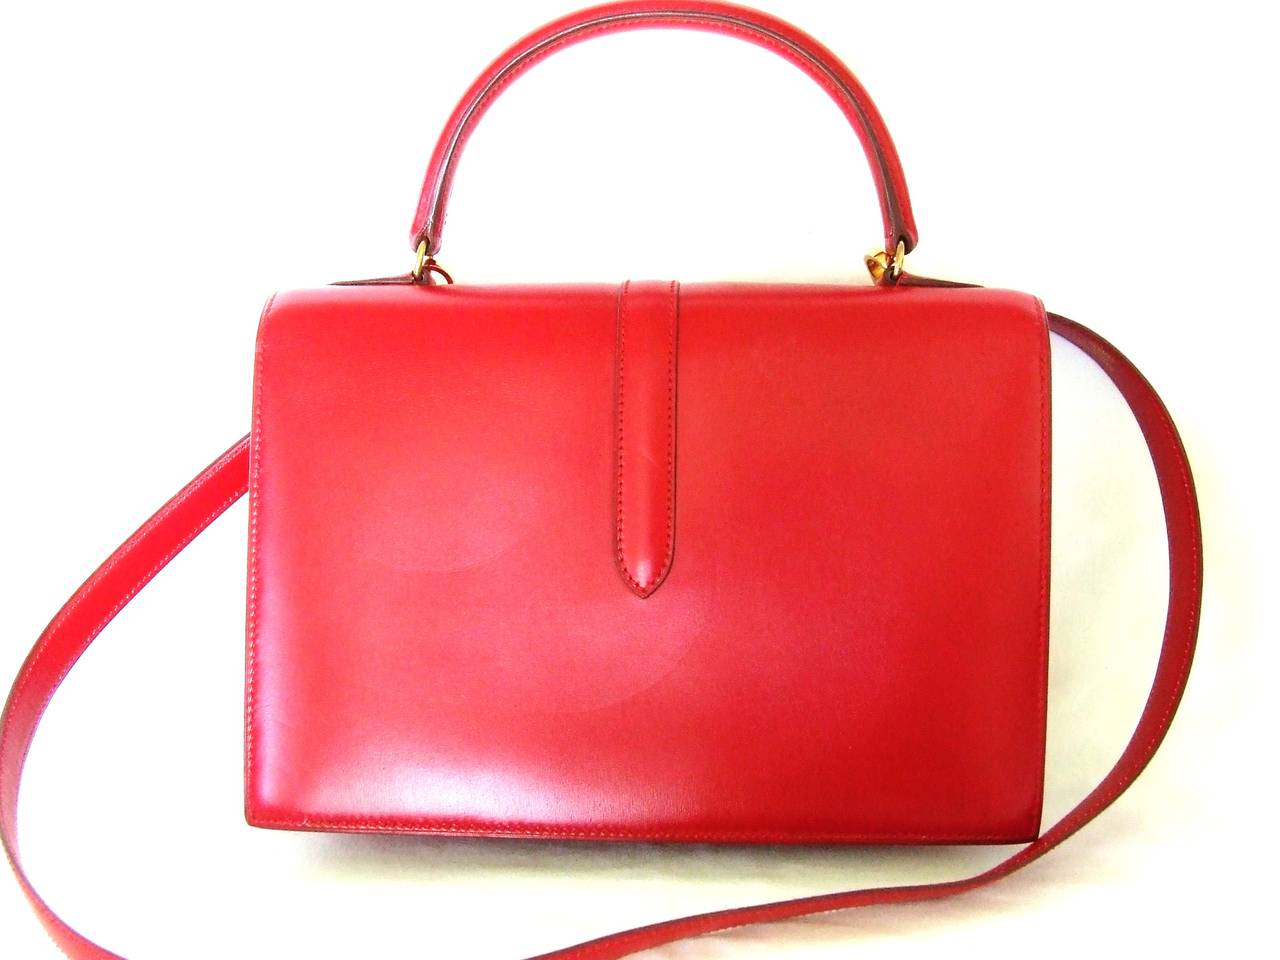 BEAUTIFUL AND VERY RARE AUTHENTIC HERMES BAG

